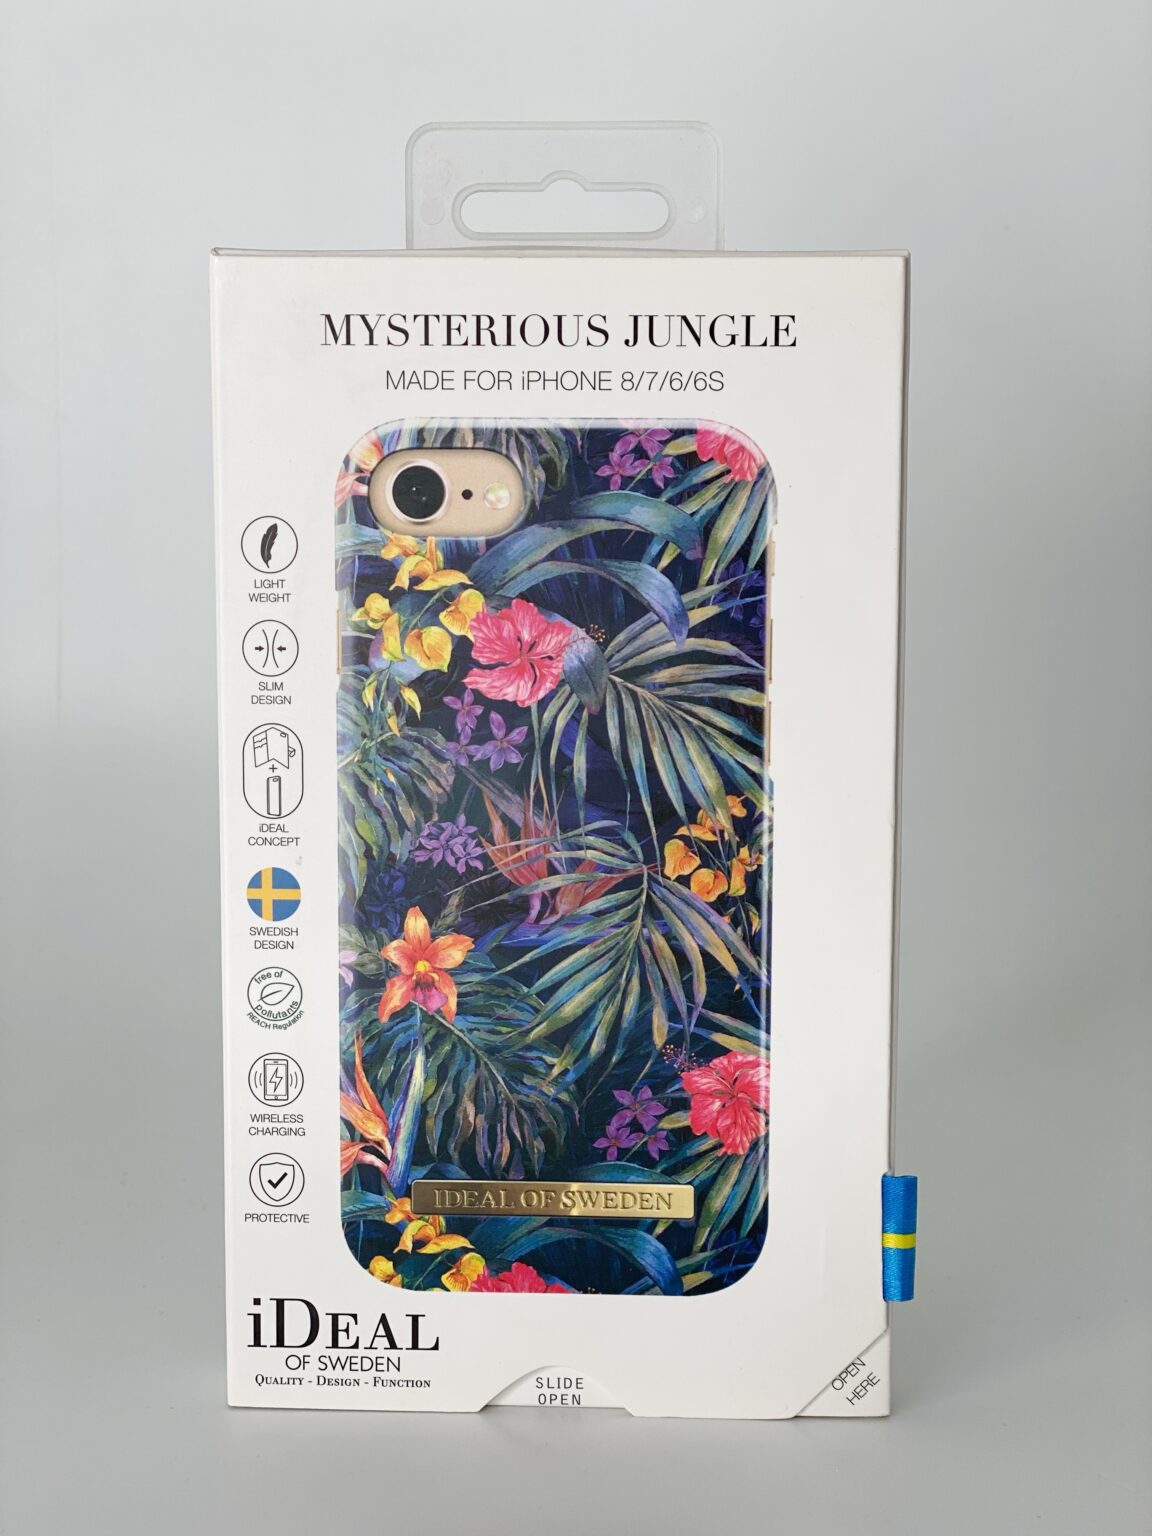 iDeal of Sweden case Mysterious Jungle - iPhone 6 / 6S / 7/8